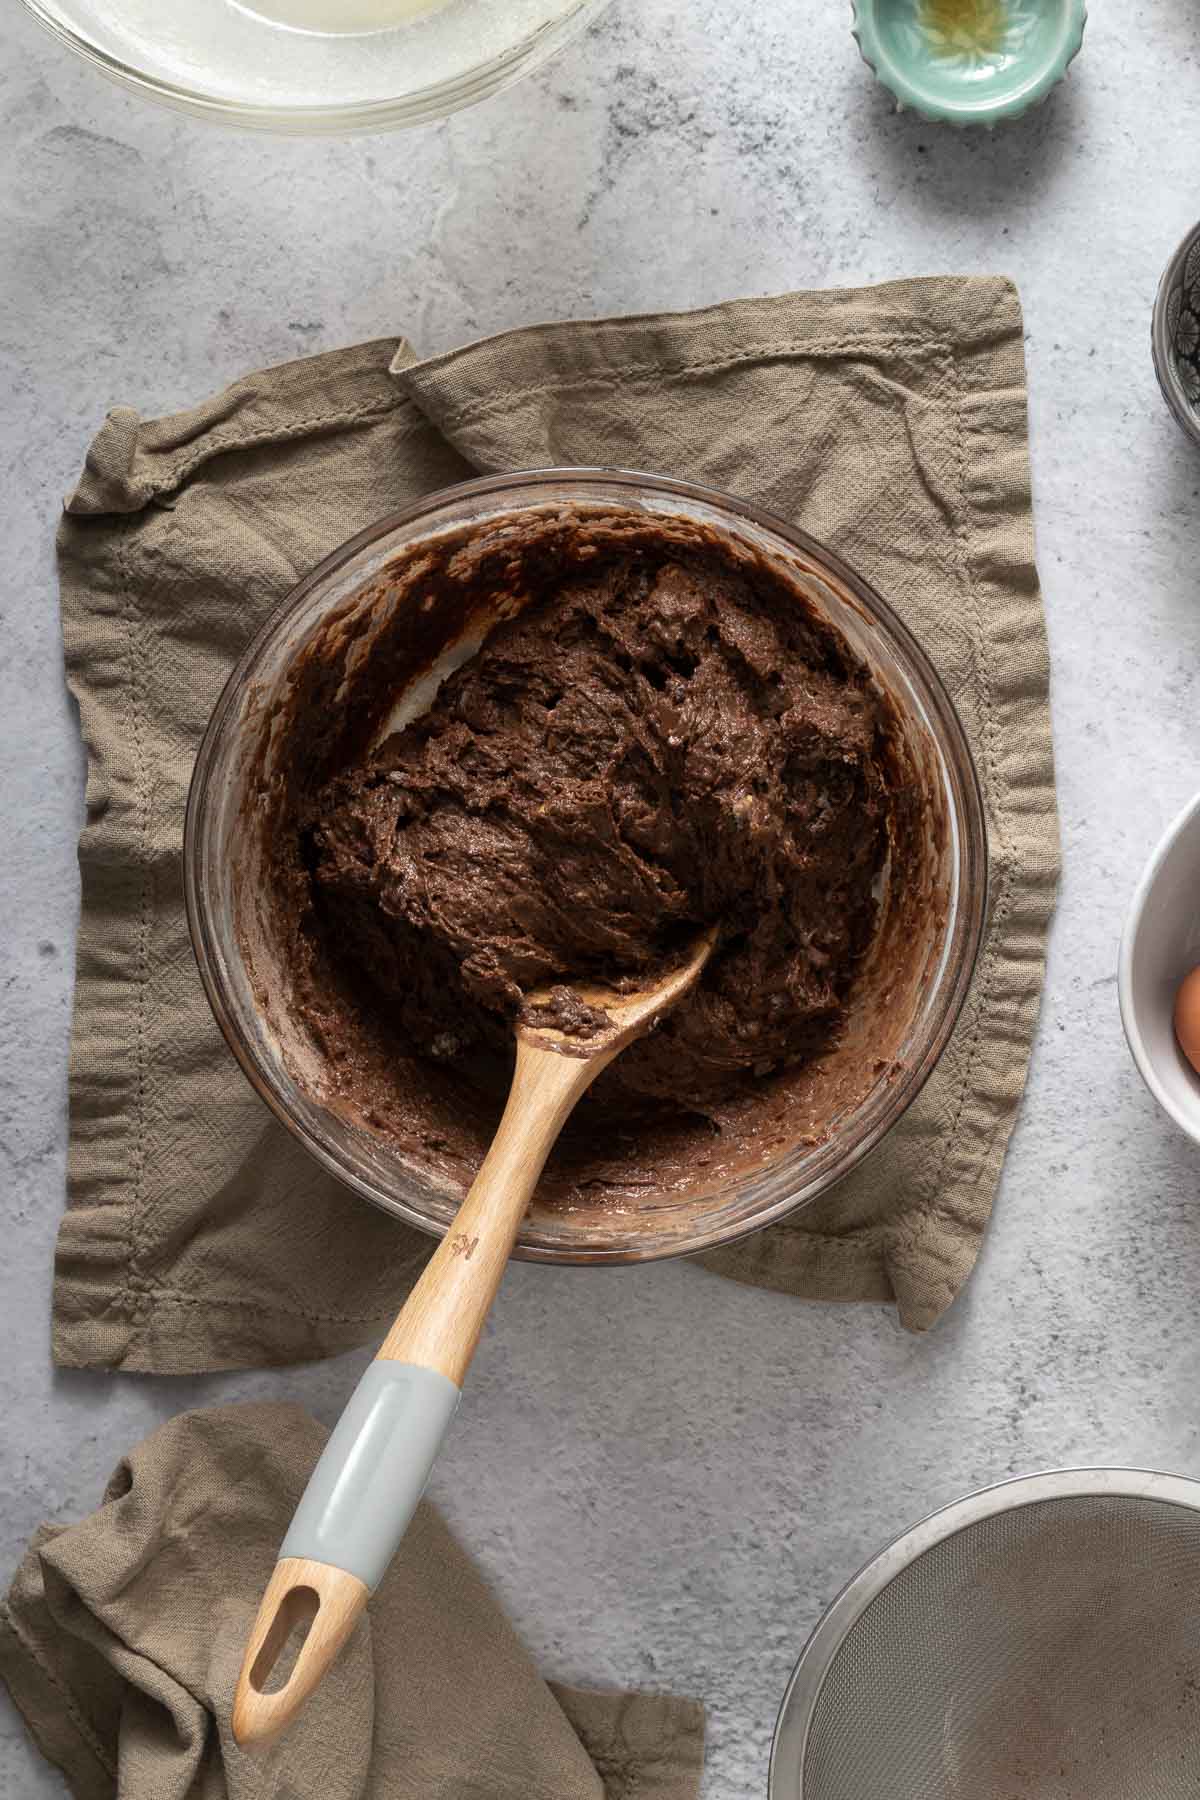 Triple chocolate muffin batter in a bowl.